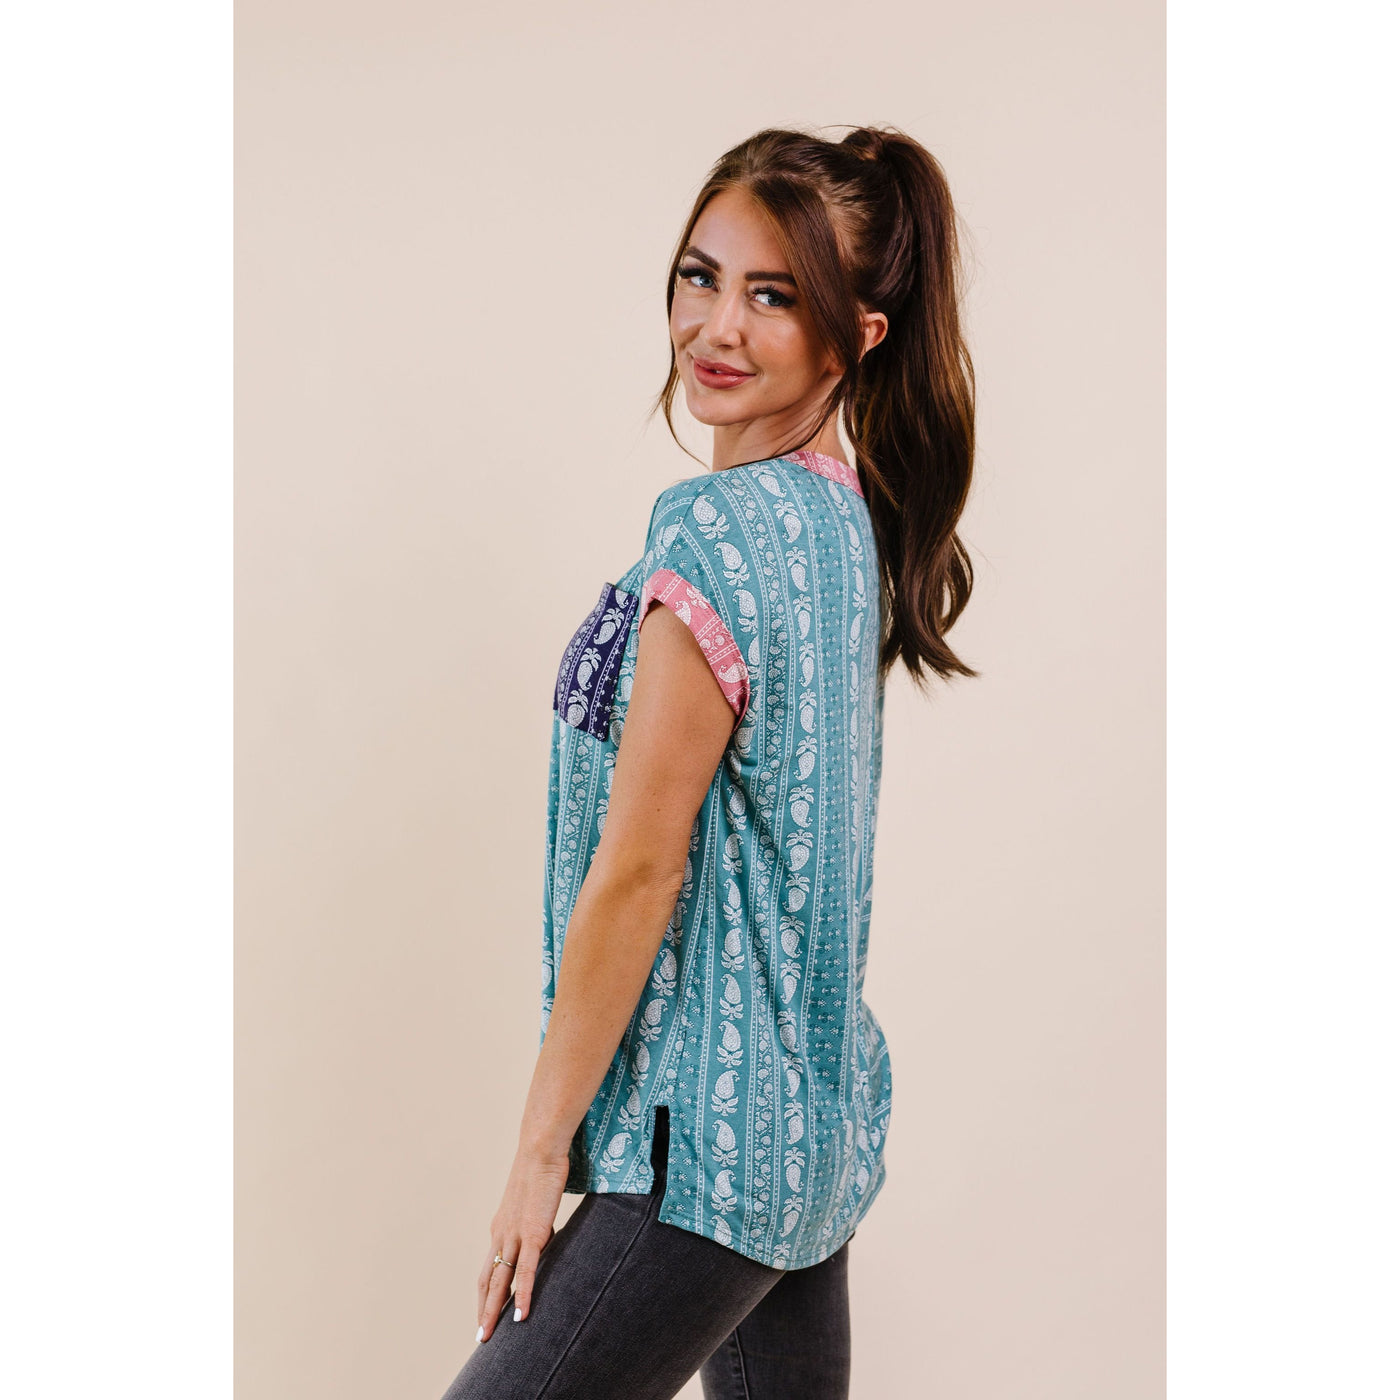 Paisley Block Party Top In Teal-Womens-Graceful & Chic Boutique, Family Clothing Store in Waxahachie, Texas